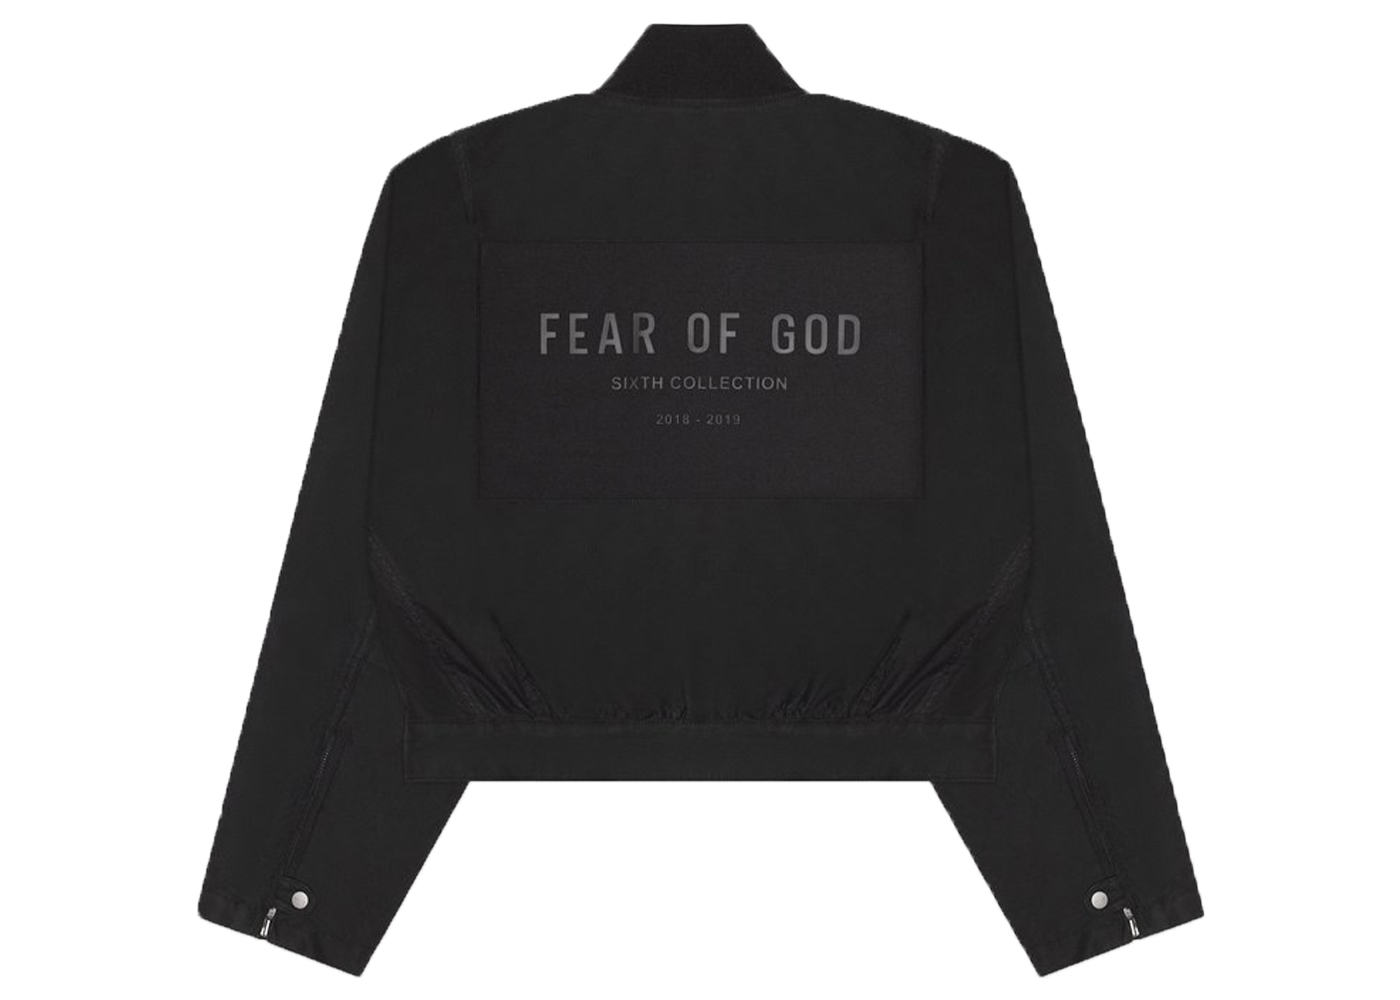 FEAR OF GOD Cotton Bomber Jacket Black - Sixth Collection - JP